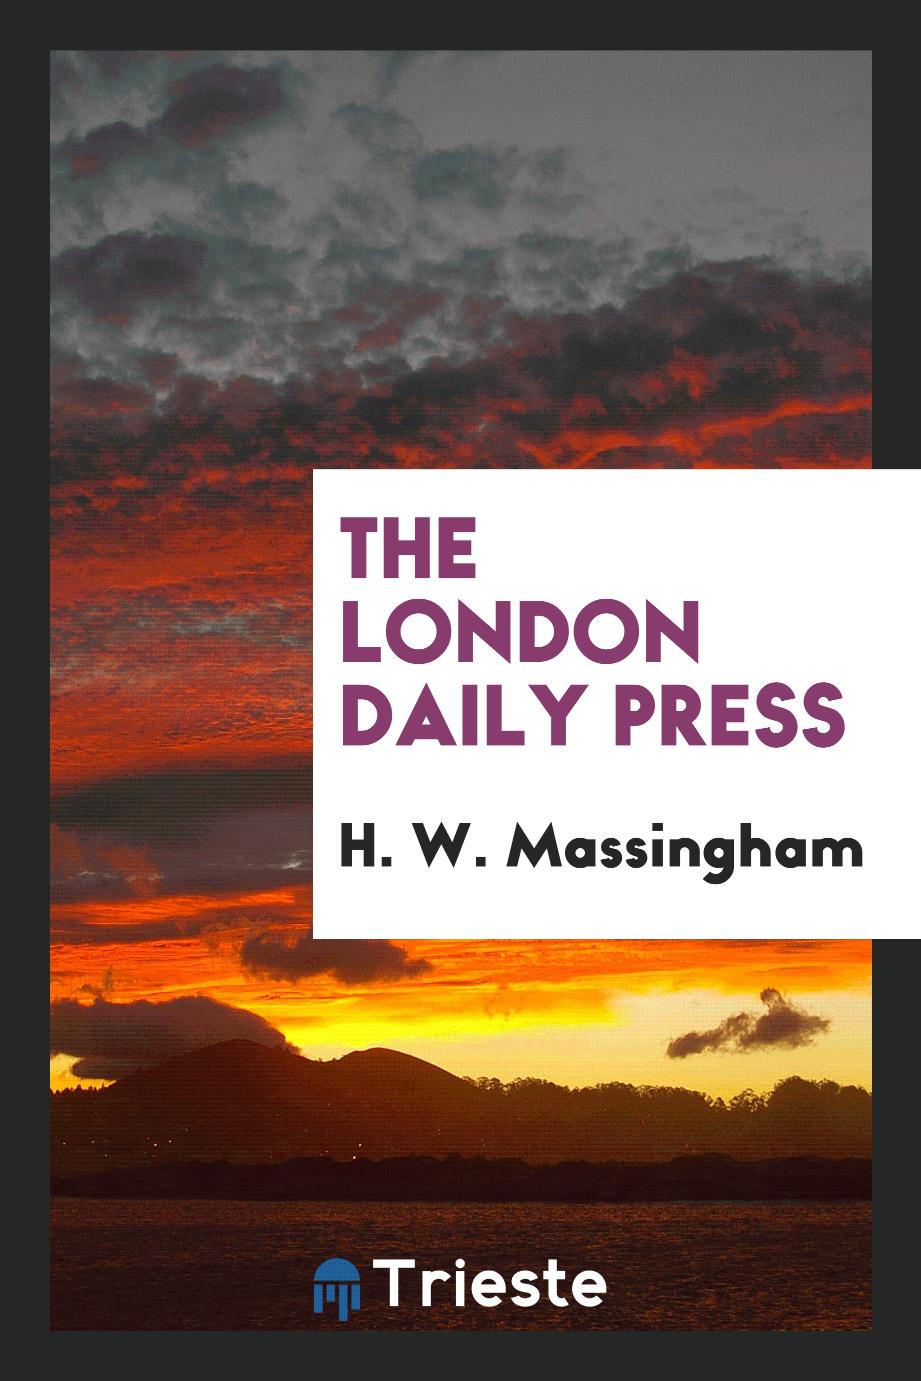 The London daily press